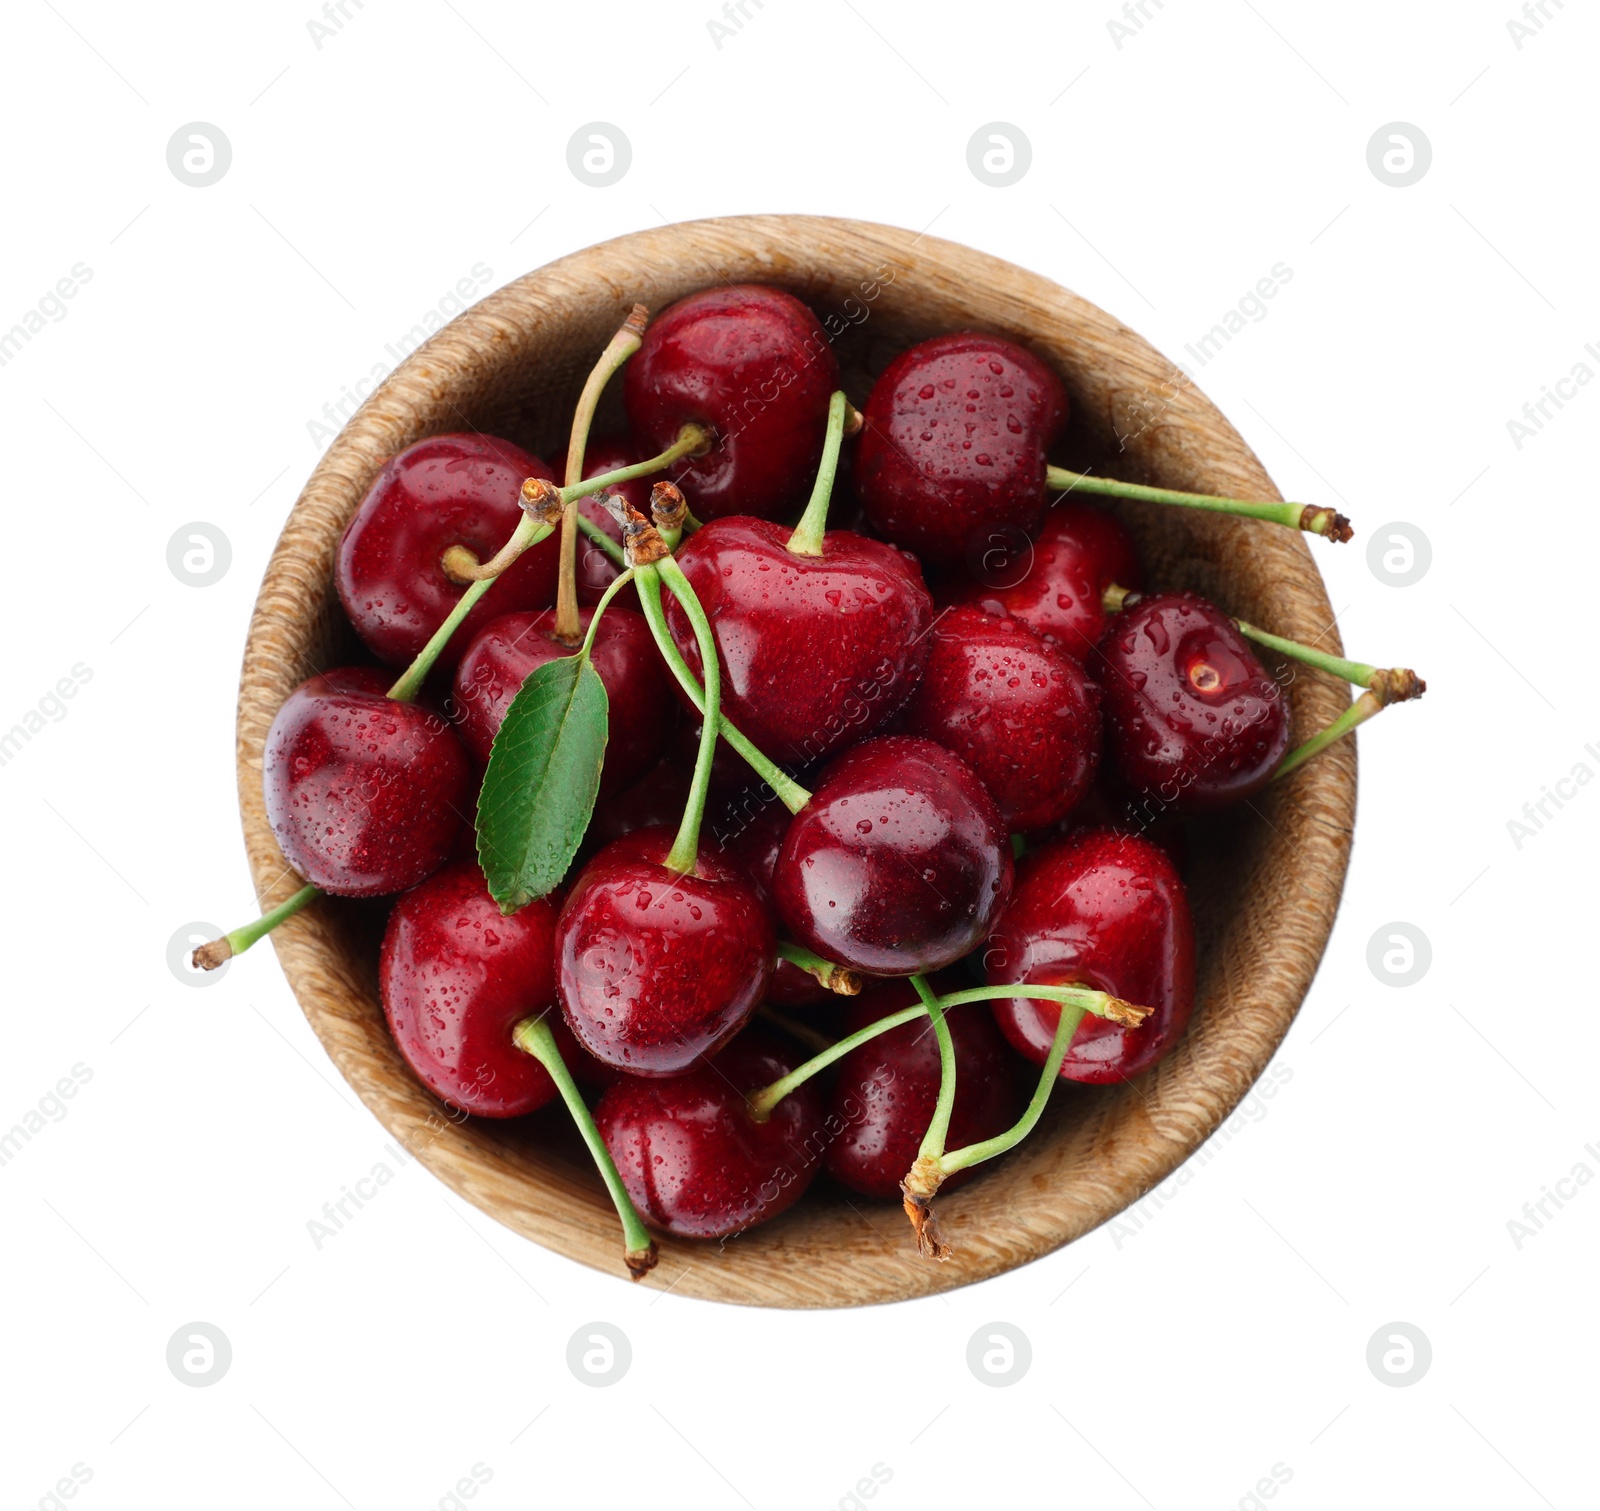 Photo of Tasty ripe sweet cherries in wooden bowl on white background, top view